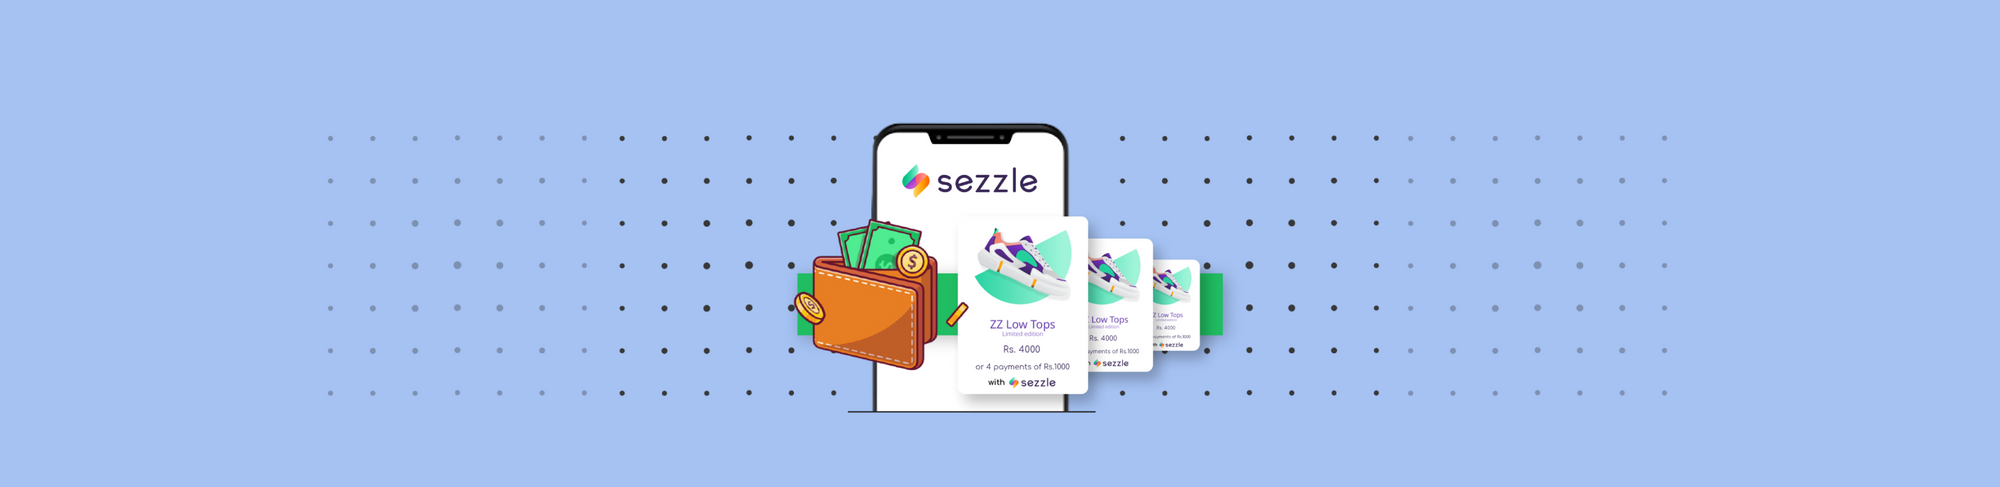 Sezzle - A buy now pay later solution